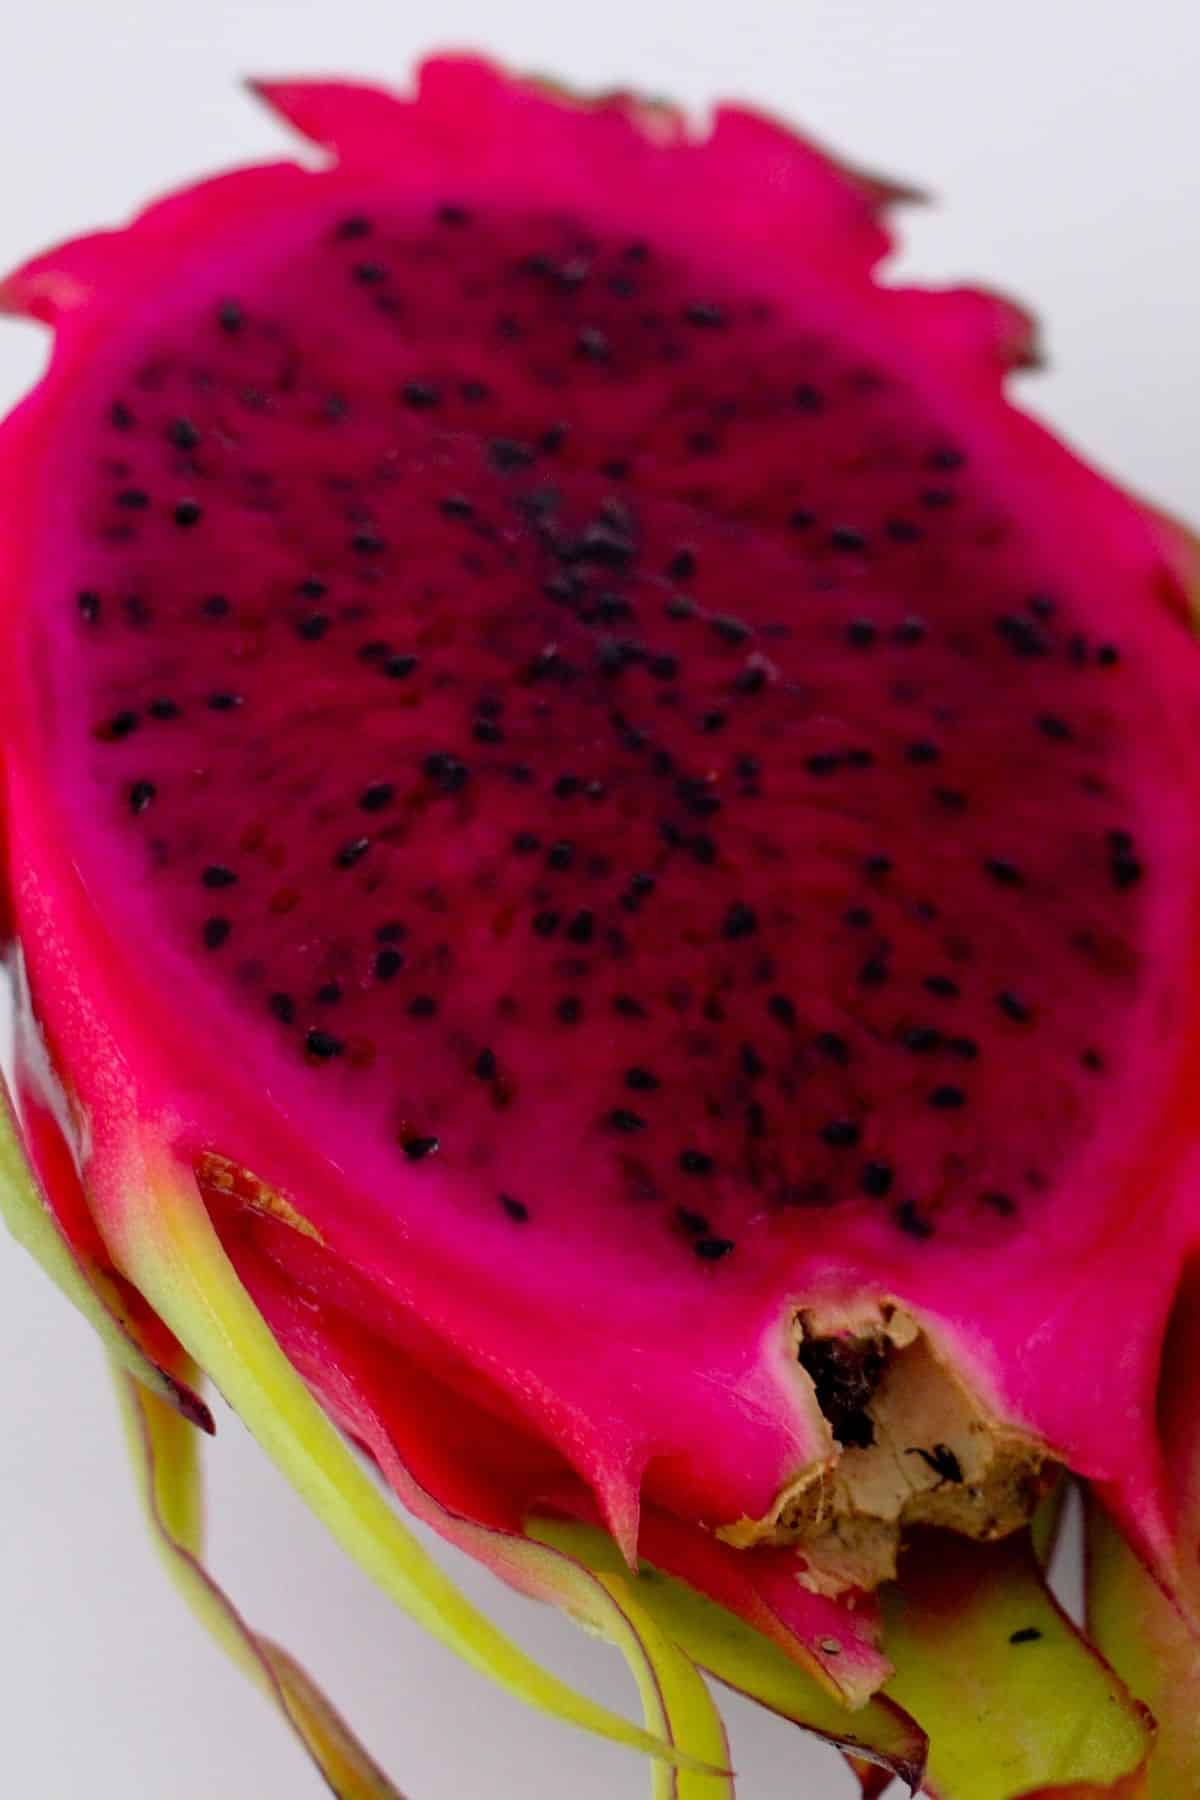 Red flesh dragonfruit cut in half on a white surface.